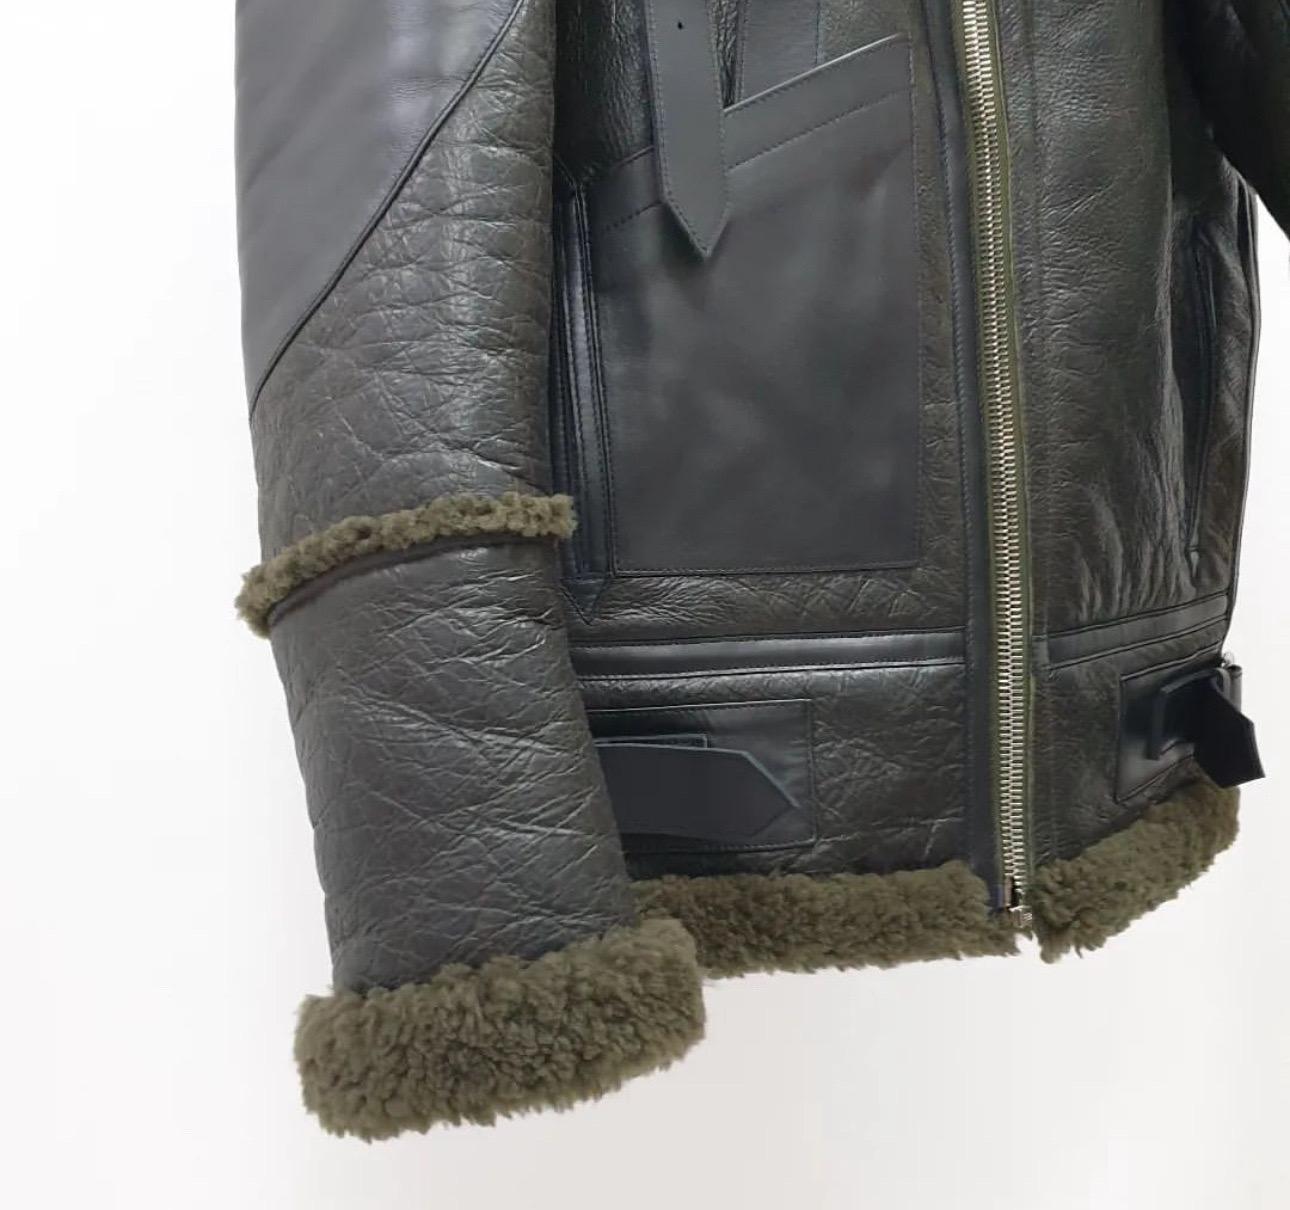 Balenciaga Shearling Leather Jacket in Khakhi.

Oversized

Sold out..Rare colourway more Suttle than black white style.
The jacket is fully lined with thick luxurious sheepskin.

Very warm coat for winter.

Sz.36

Very good condition.